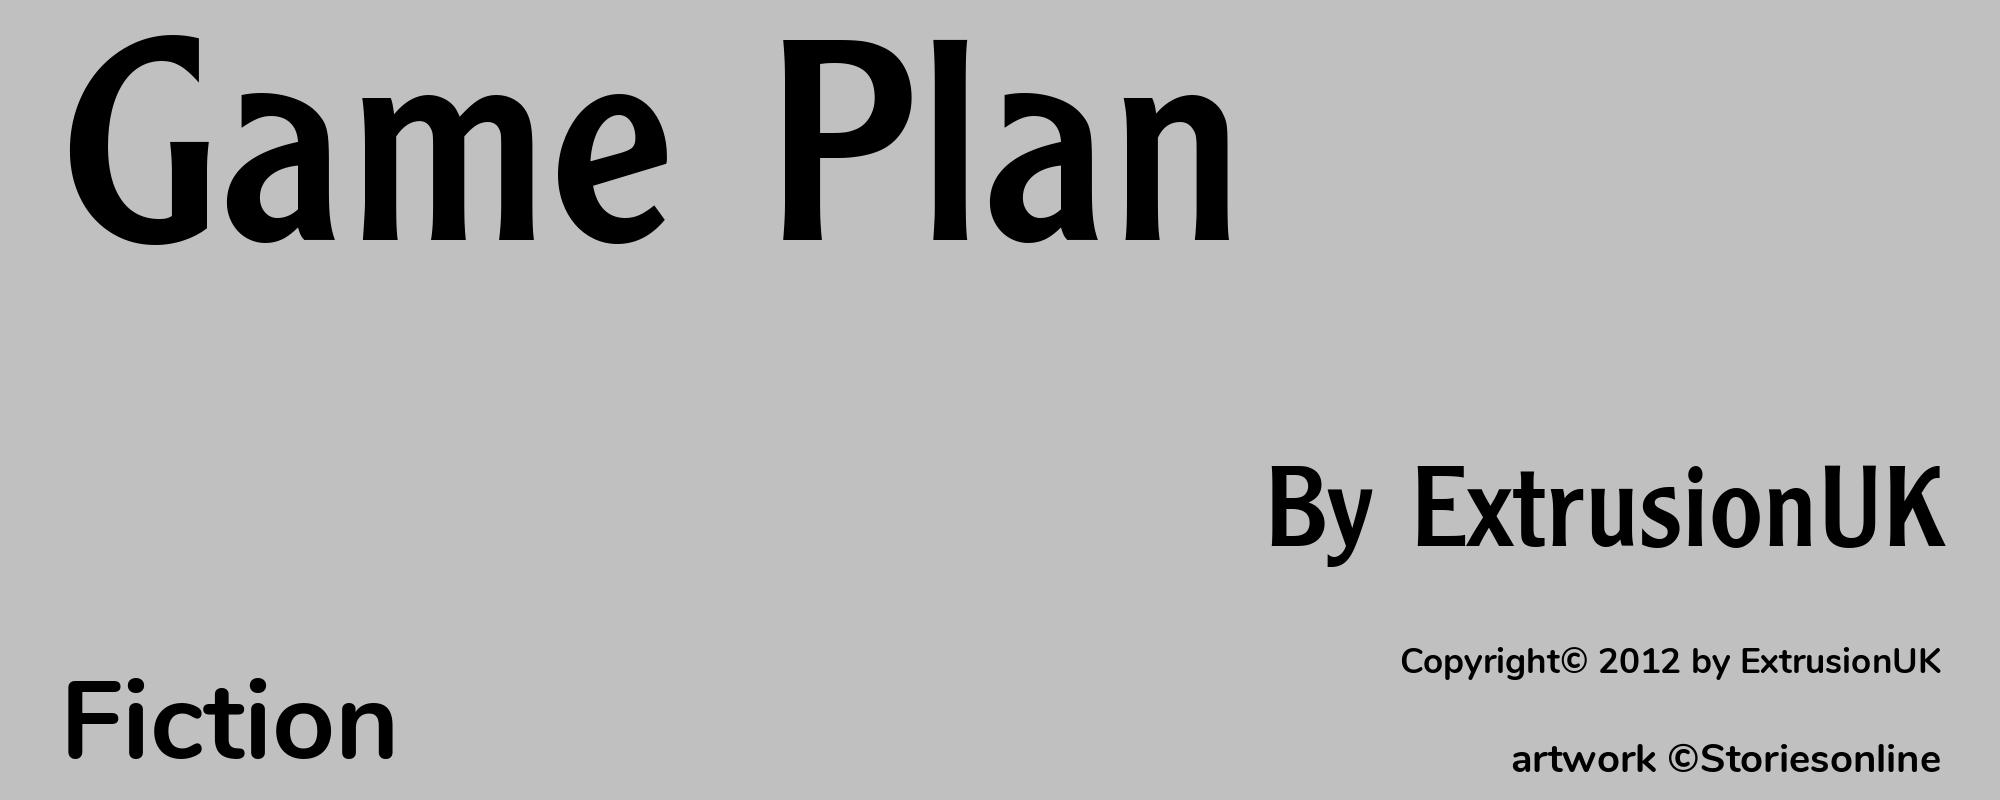 Game Plan - Cover